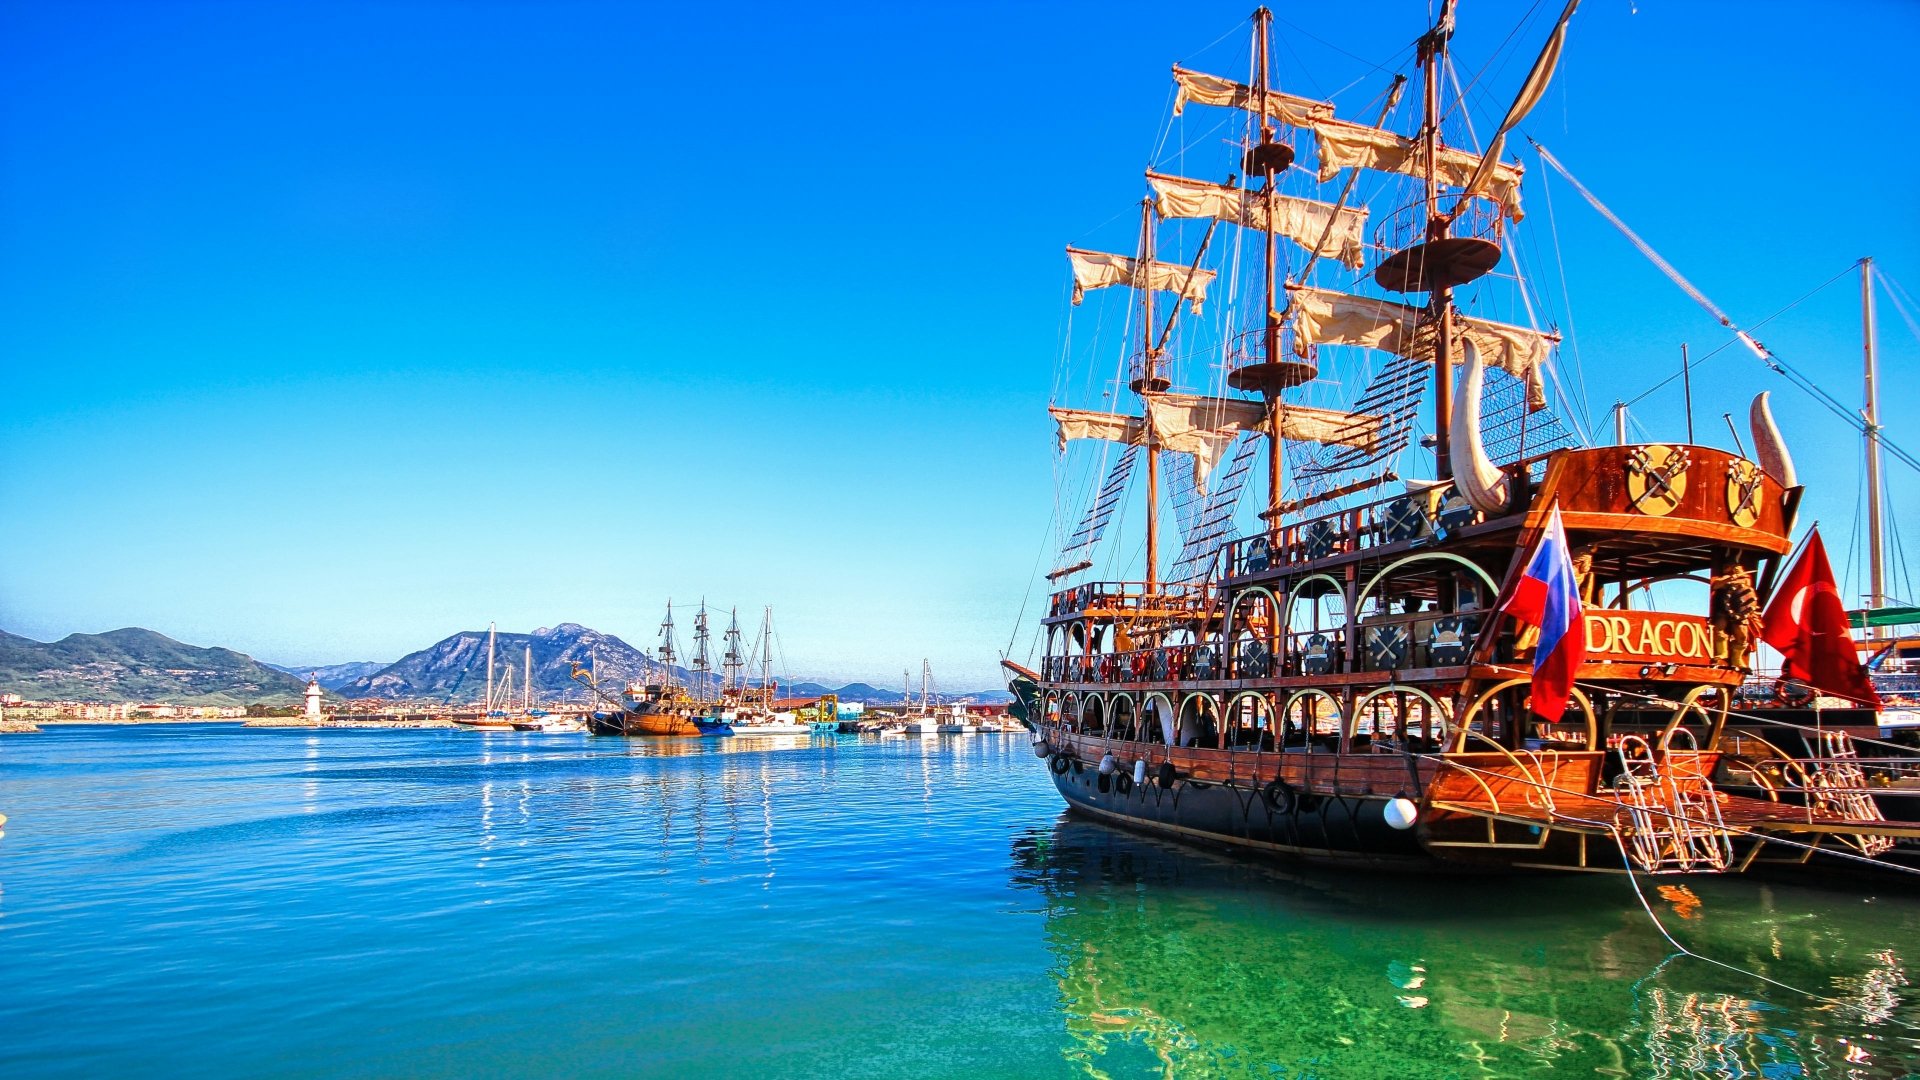 HD desktop wallpaper featuring a vibrant scene with the Dragon ship and other tall ships in a crystal-clear blue harbor under a bright sky.